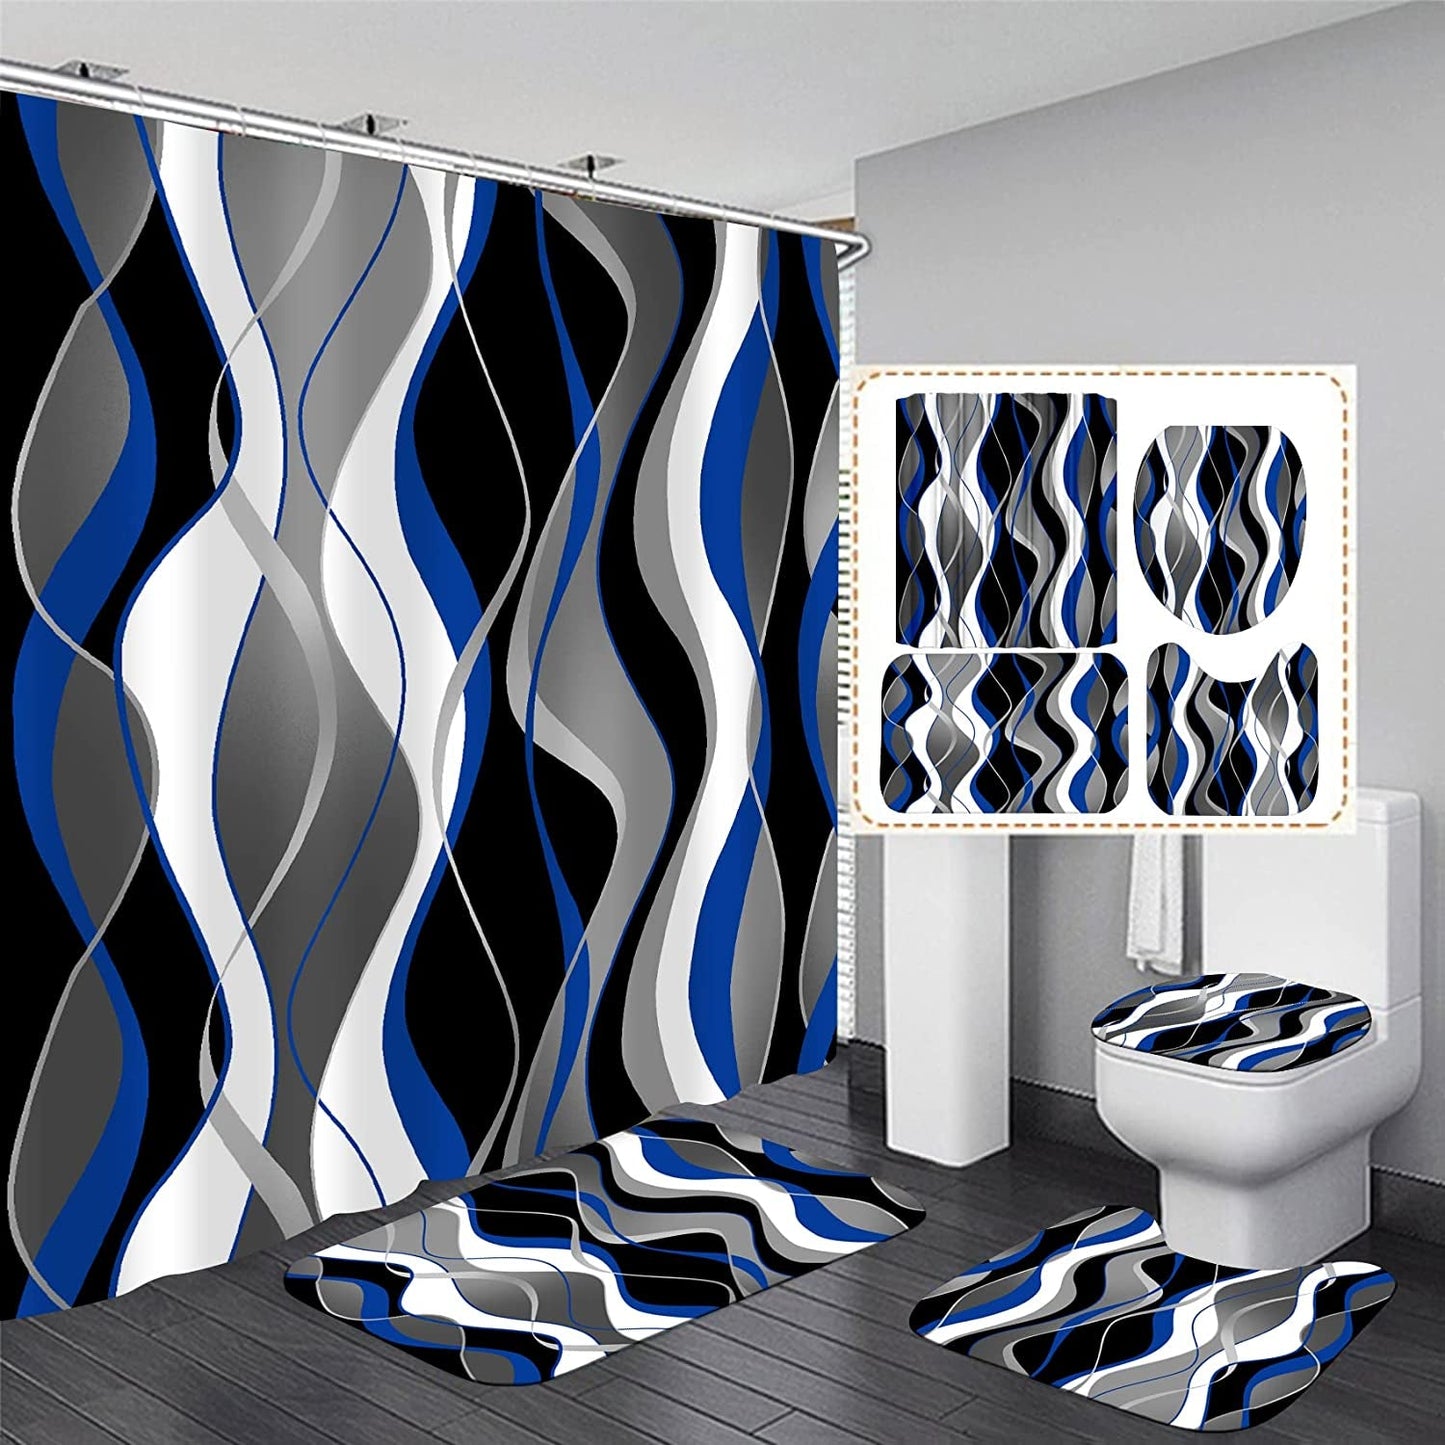 Nkzply 4 Pcs Blue and Black Striped Shower Curtain Set Grey and White Bathroom Sets Modern Home Bathroom Decor with Rugs and Toilet Lid Cover